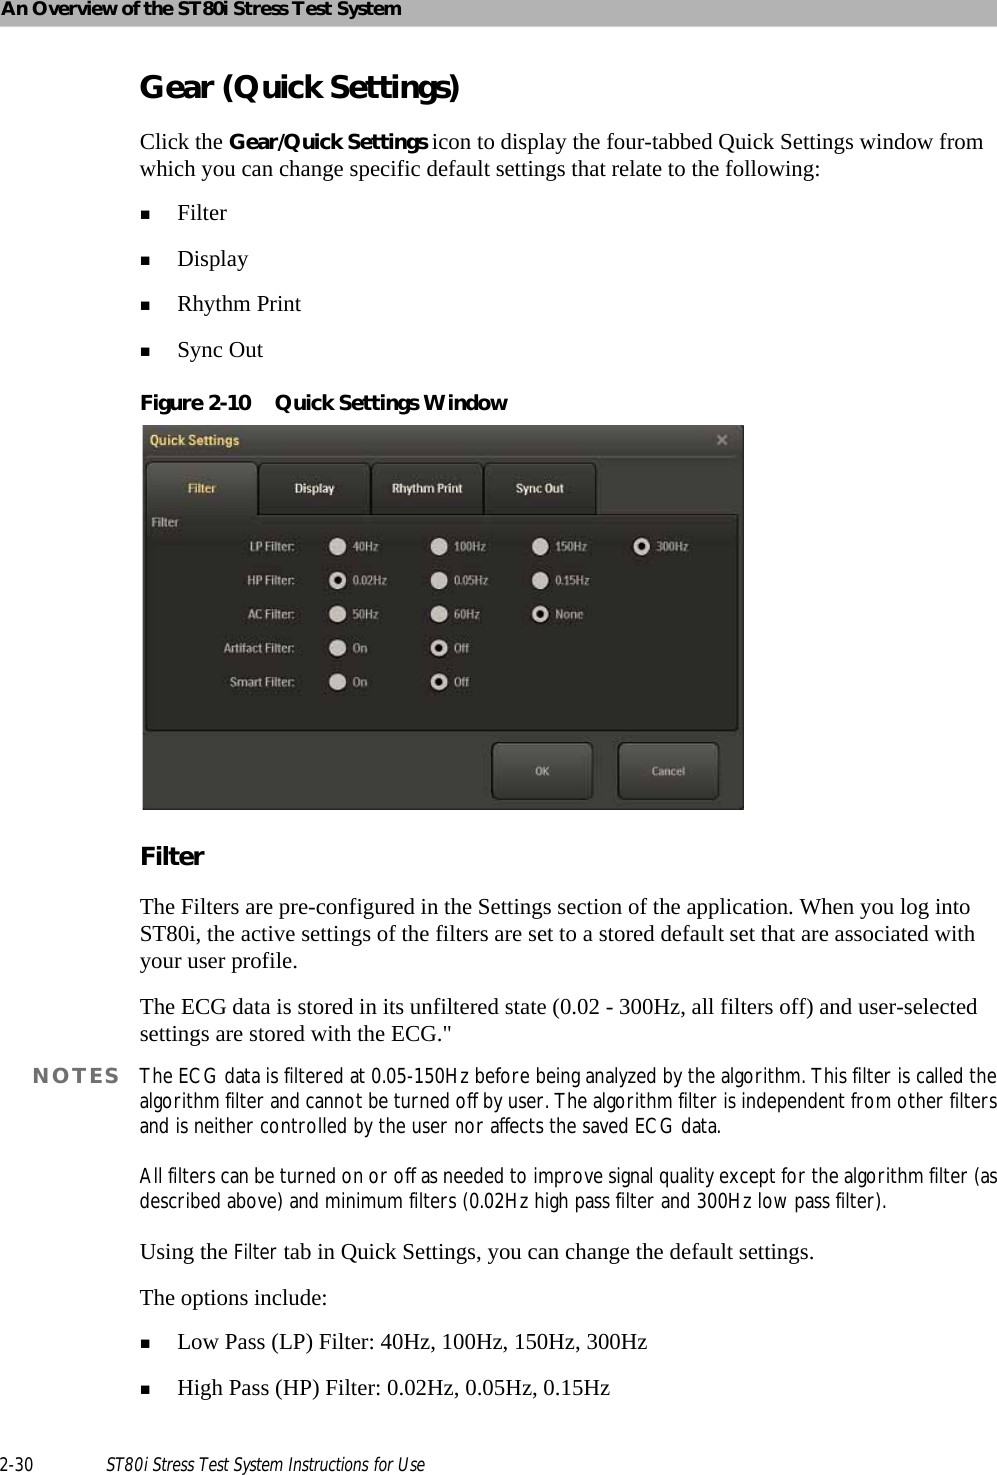 An Overview of the ST80i Stress Test System2-30 ST80i Stress Test System Instructions for UseGear (Quick Settings)Click the Gear/Quick Settings icon to display the four-tabbed Quick Settings window from which you can change specific default settings that relate to the following:FilterDisplayRhythm PrintSync OutFigure 2-10 Quick Settings WindowFilterThe Filters are pre-configured in the Settings section of the application. When you log into ST80i, the active settings of the filters are set to a stored default set that are associated with your user profile. The ECG data is stored in its unfiltered state (0.02 - 300Hz, all filters off) and user-selected settings are stored with the ECG.&quot;NOTES The ECG data is filtered at 0.05-150Hz before being analyzed by the algorithm. This filter is called the algorithm filter and cannot be turned off by user. The algorithm filter is independent from other filters and is neither controlled by the user nor affects the saved ECG data.All filters can be turned on or off as needed to improve signal quality except for the algorithm filter (as described above) and minimum filters (0.02Hz high pass filter and 300Hz low pass filter).Using the Filter tab in Quick Settings, you can change the default settings.The options include:Low Pass (LP) Filter: 40Hz, 100Hz, 150Hz, 300HzHigh Pass (HP) Filter: 0.02Hz, 0.05Hz, 0.15Hz